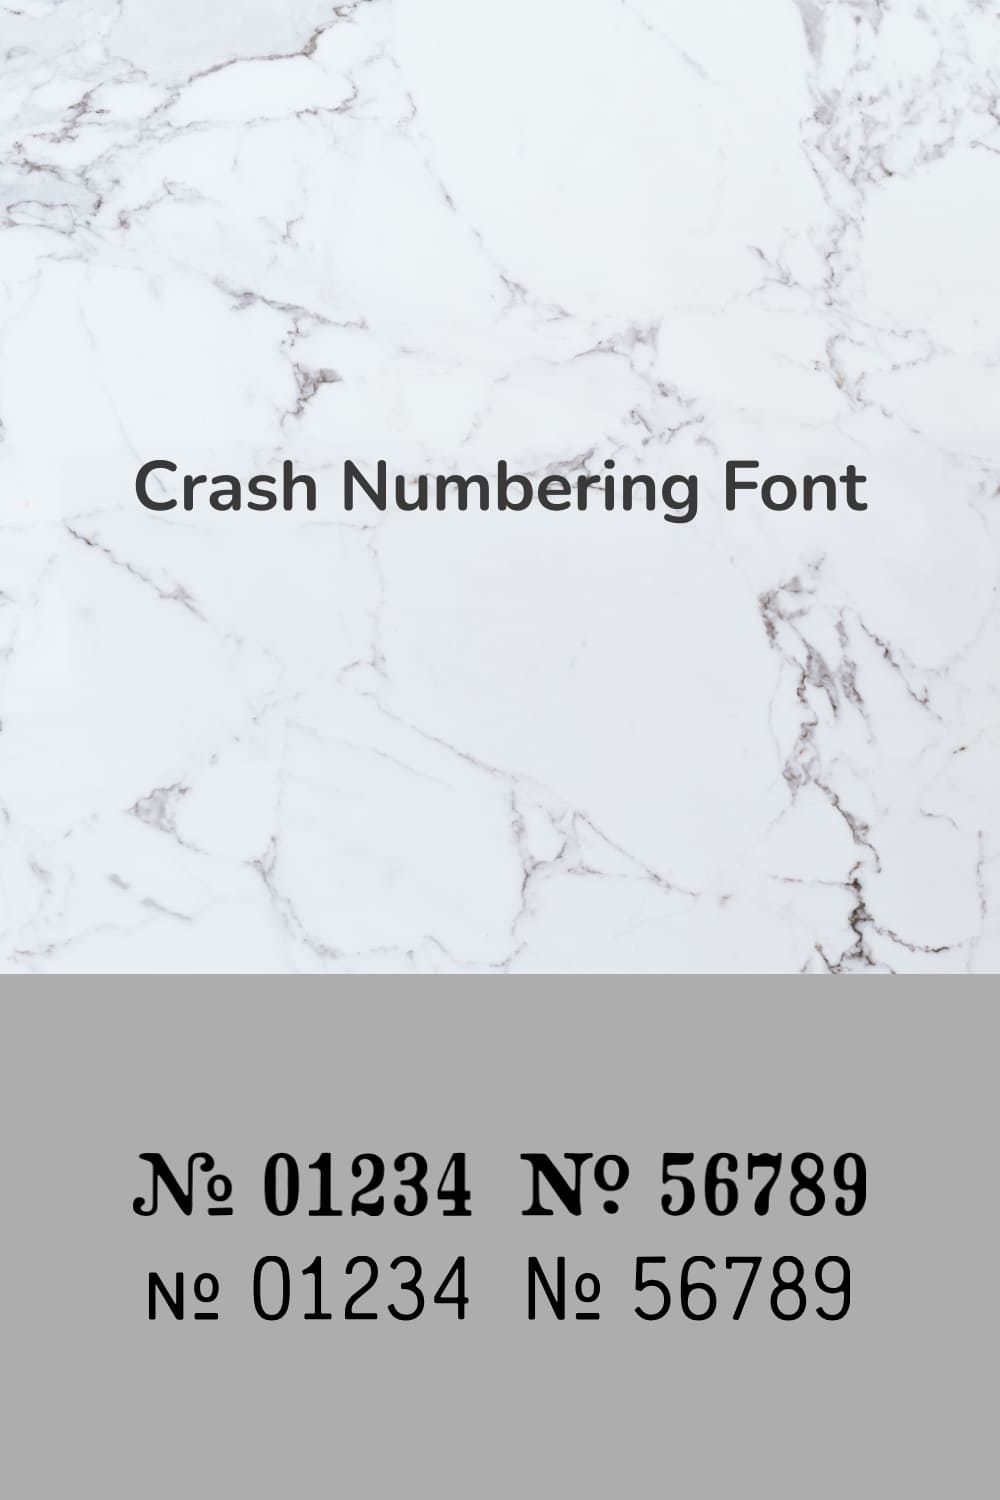 An example of a Crash Numbering Font on a marble background.